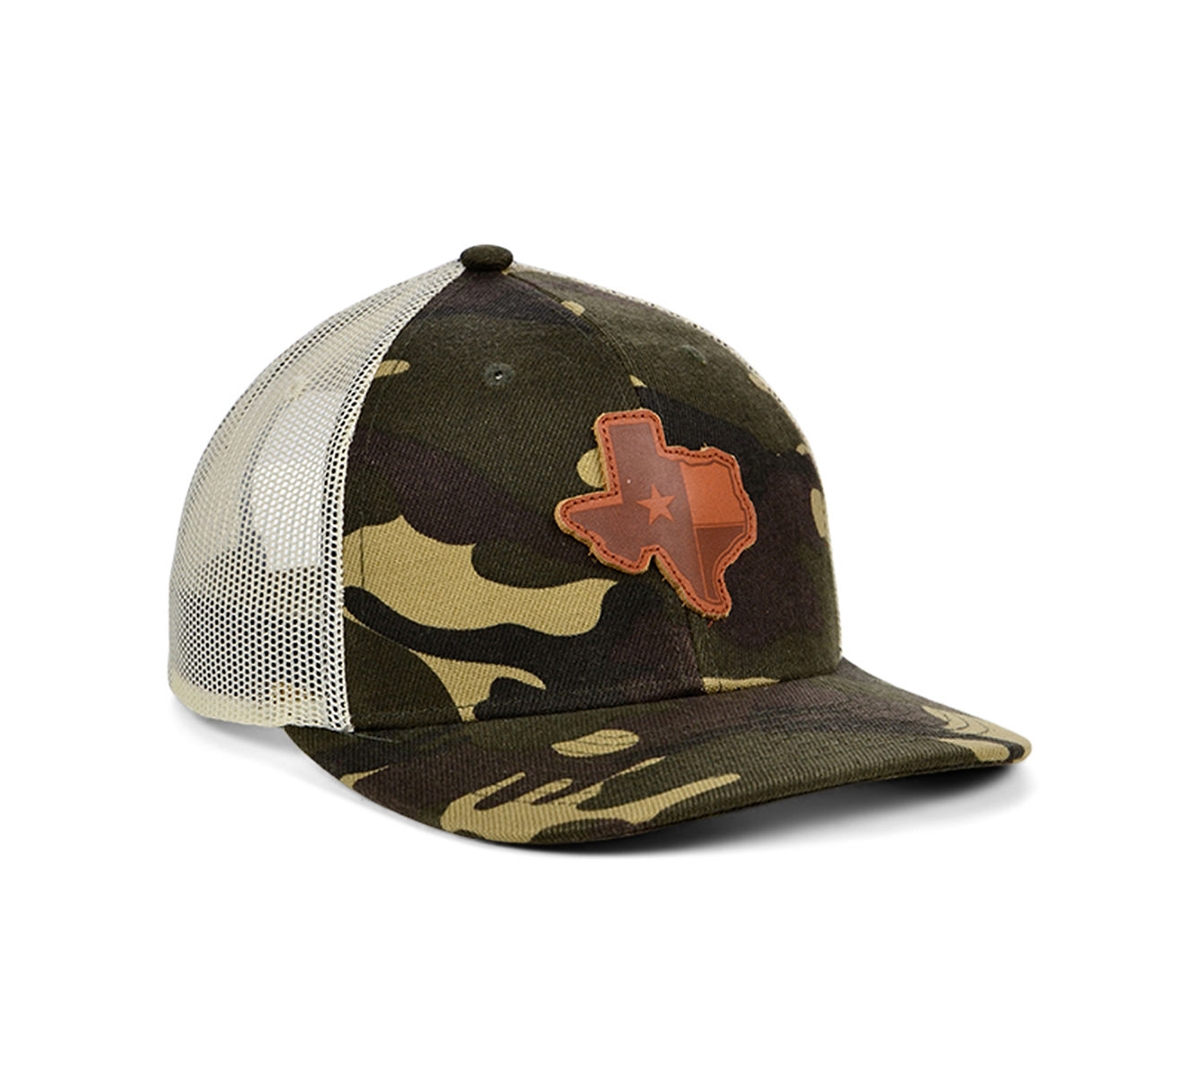 Shop Lids Local Crowns Texas Woodland State Patch Curved Trucker Cap In Woodlandcamo,ivory,brown